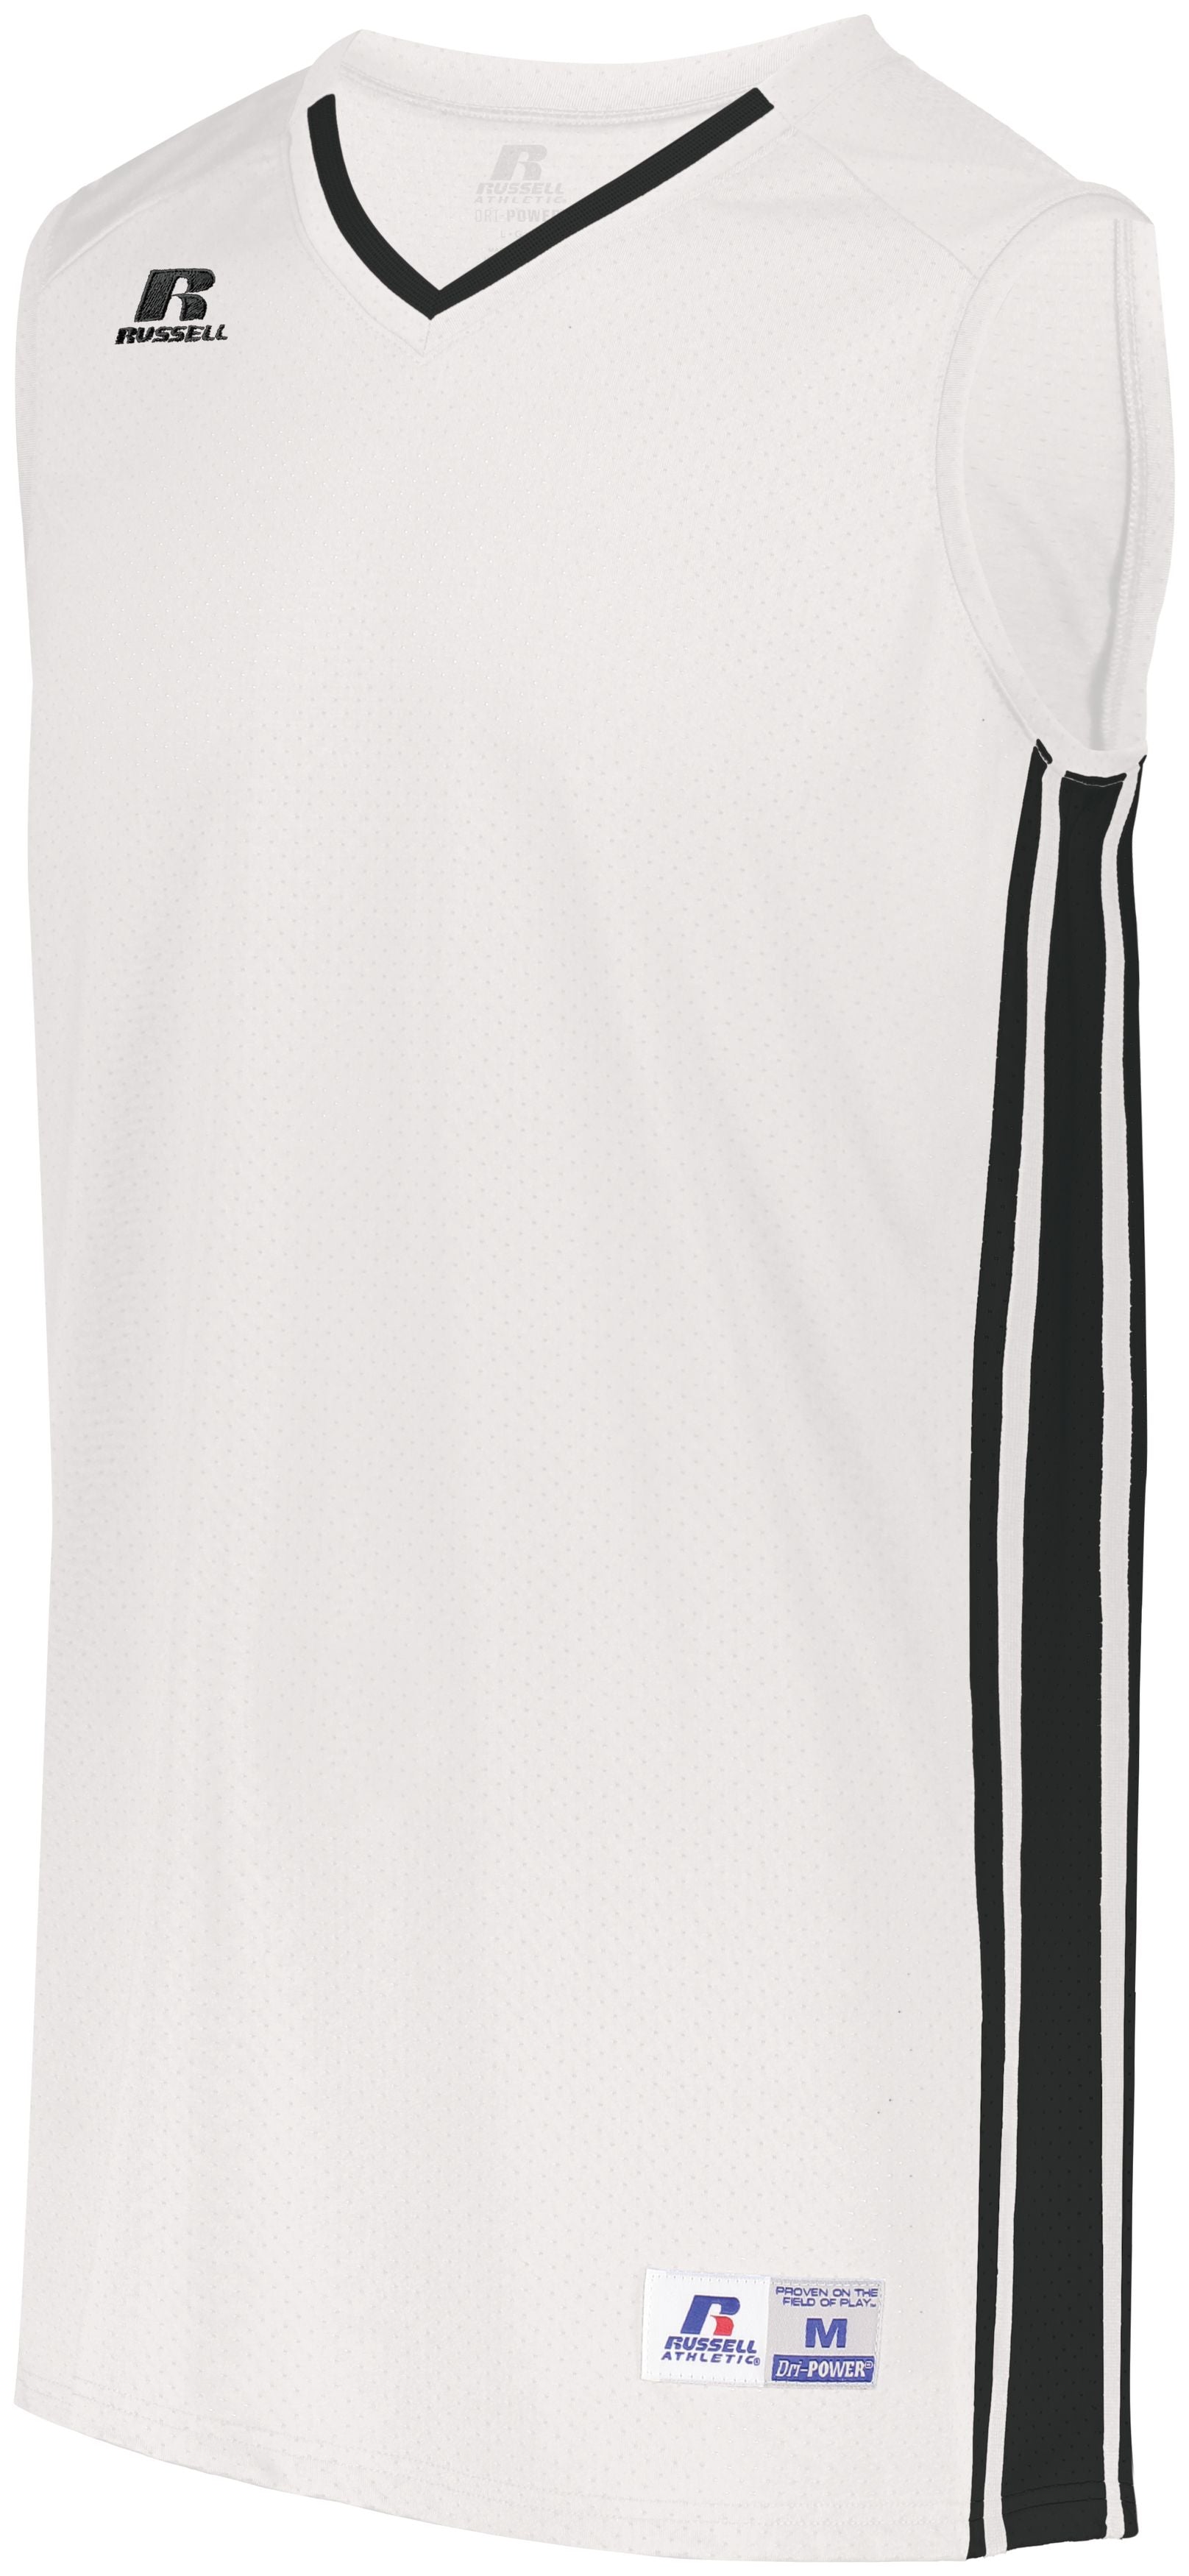 Russell Athletic Youth Legacy Basketball Jersey in White/Black  -Part of the Youth, Youth-Jersey, Basketball, Russell-Athletic-Products, Shirts, All-Sports, All-Sports-1 product lines at KanaleyCreations.com